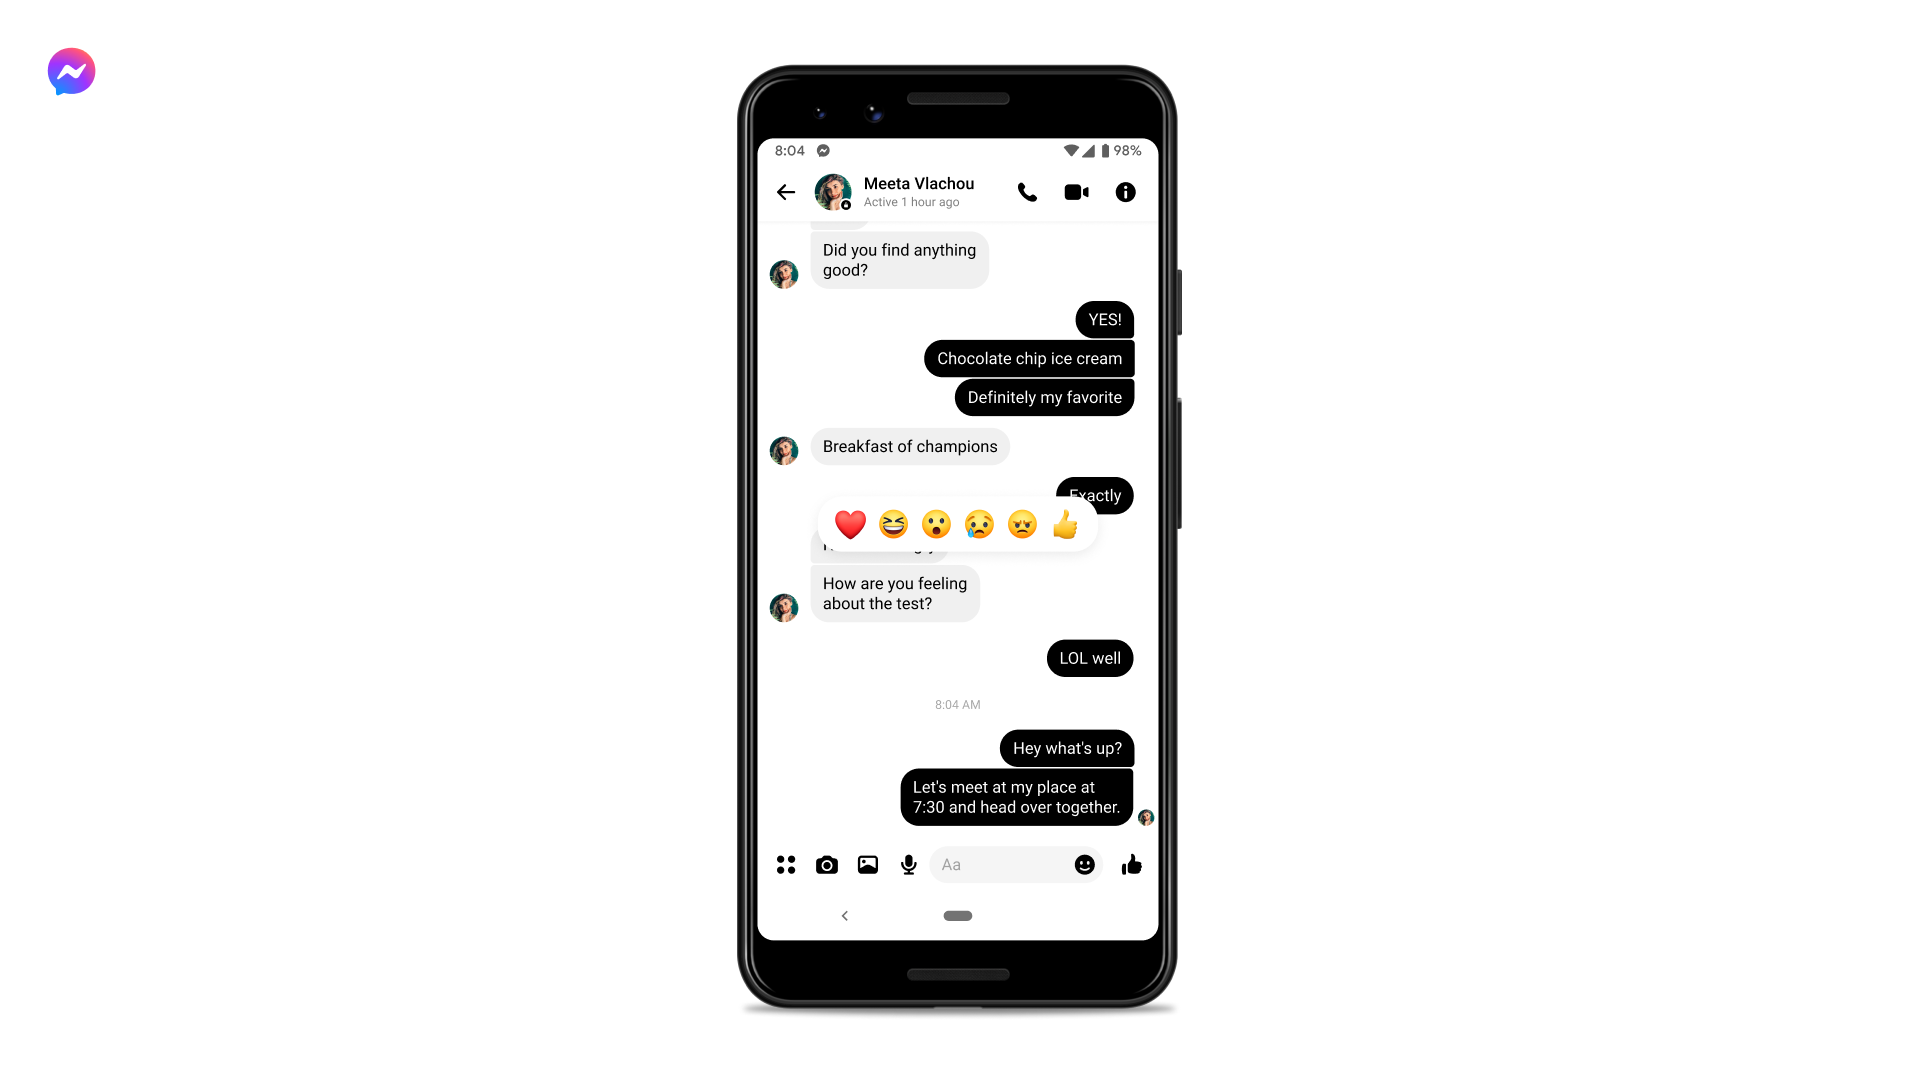 Messenger upgrades its end-to-end encrypted chat experience